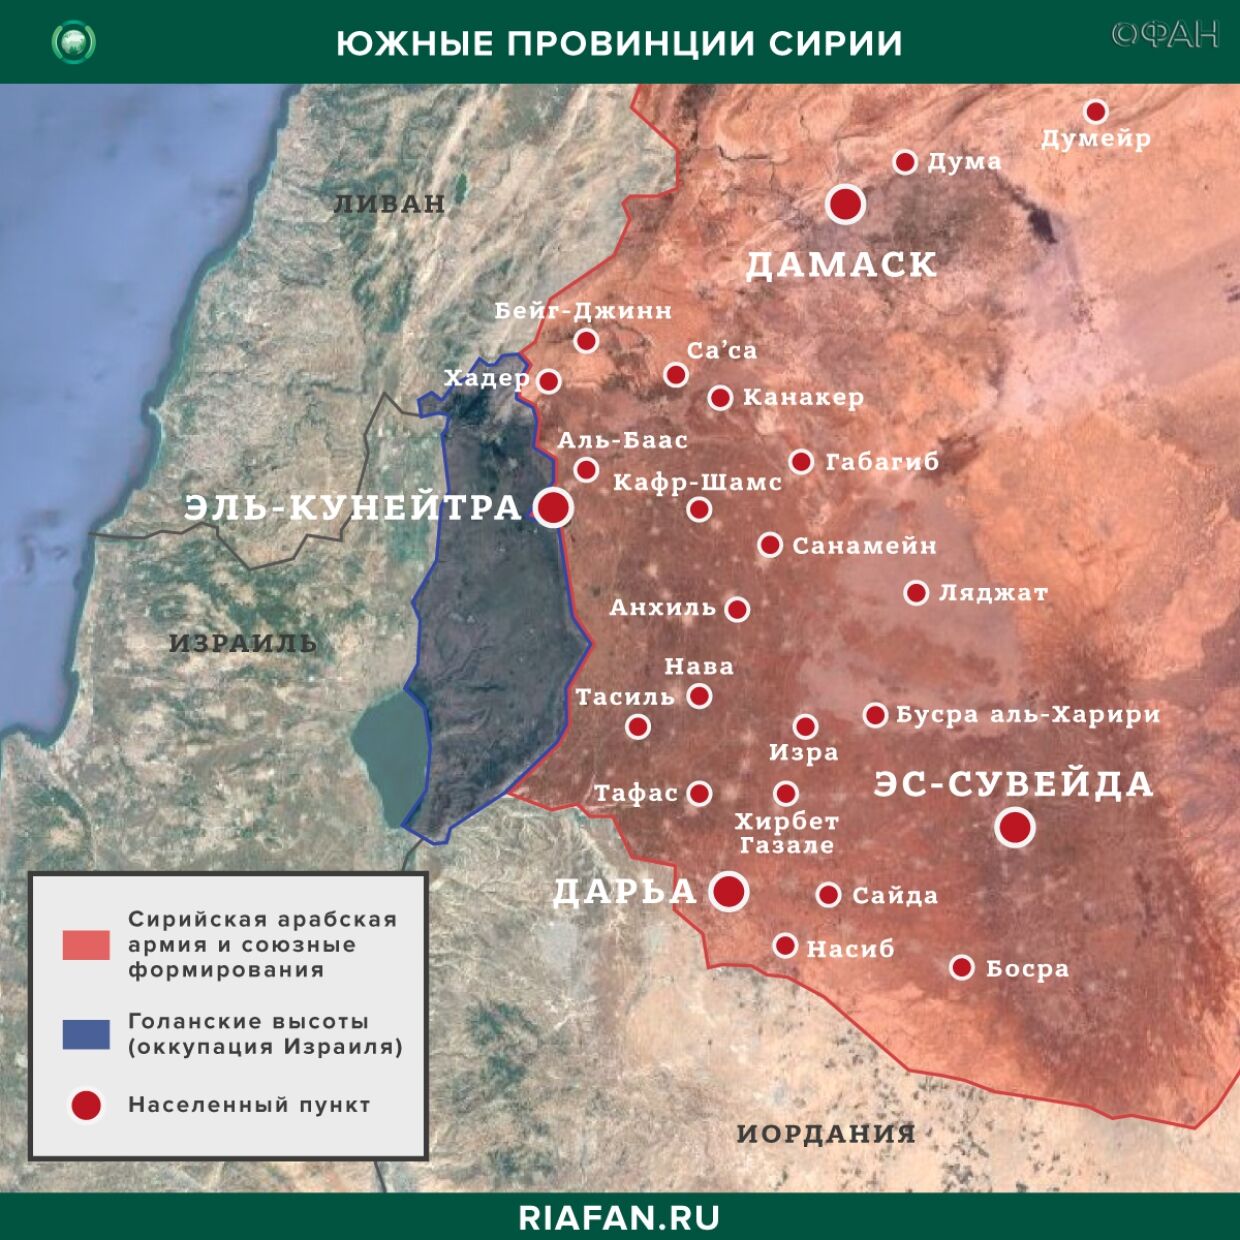 Syria the results of the day on 23 April 06.00: the explosion in Dara led to the death of a child 10 years, a new batch of US equipment moved to Hasaku